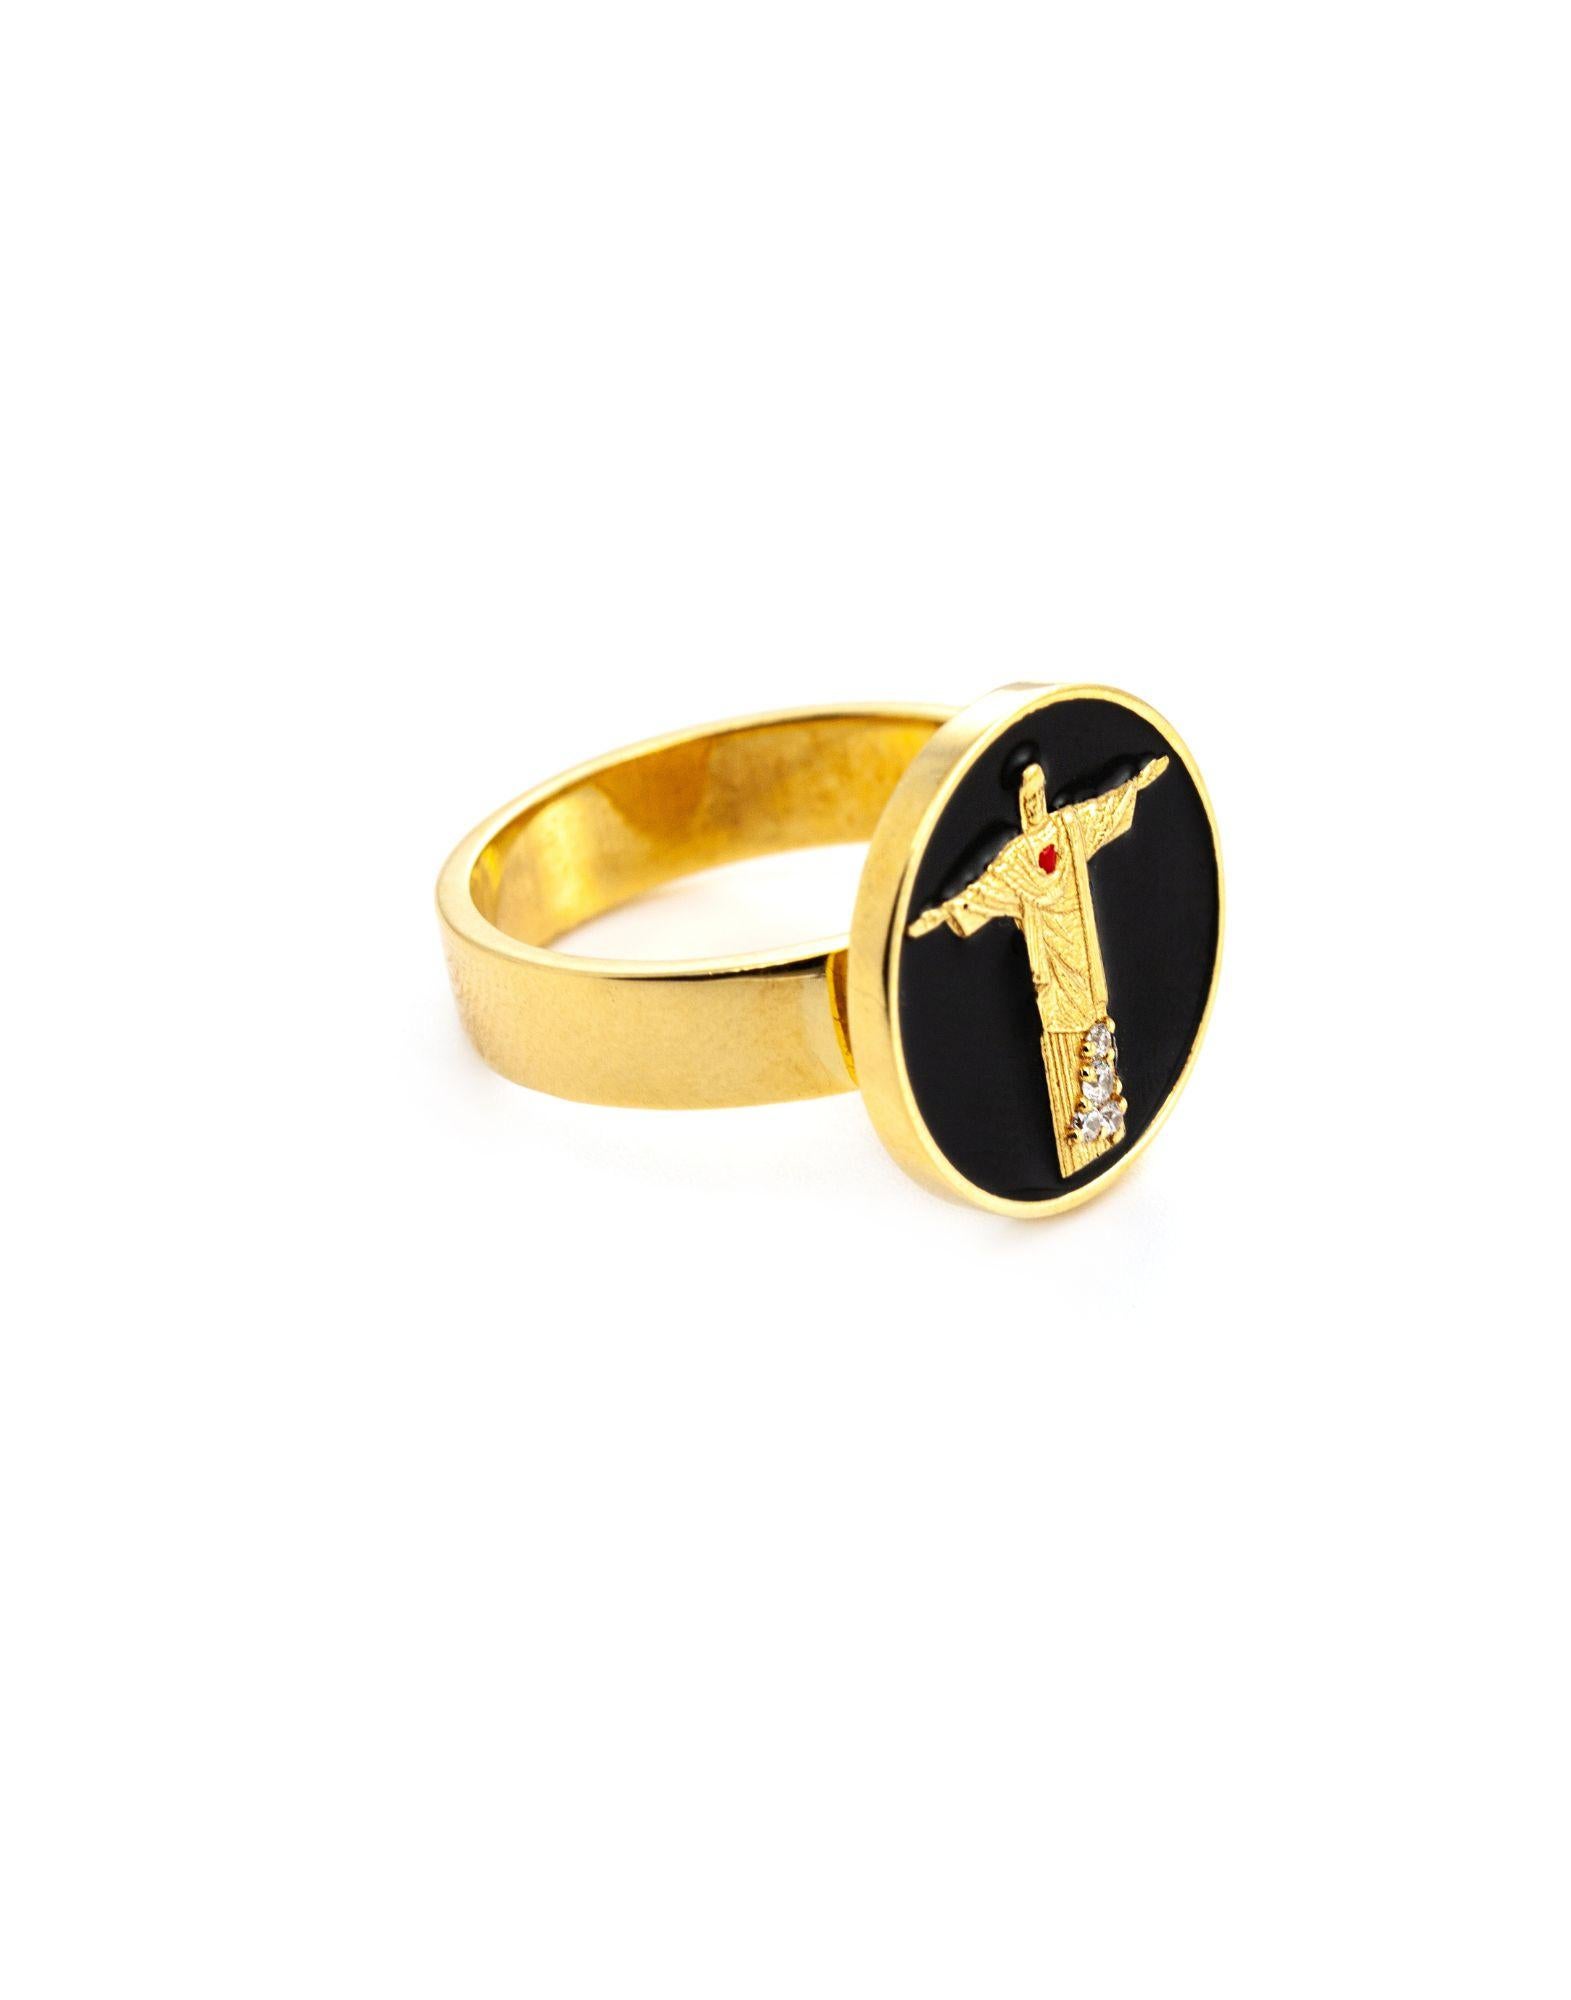 Corcovado ring in 925 gold-plated sterling silver, hand-enameled with black enamel.

Made n Italy
Warranty and gift box THAIS BERNARDES

Corcovado ring in 925 gold-plated sterling silver, hand-enameled with black enamel.

The Corcovado collection,